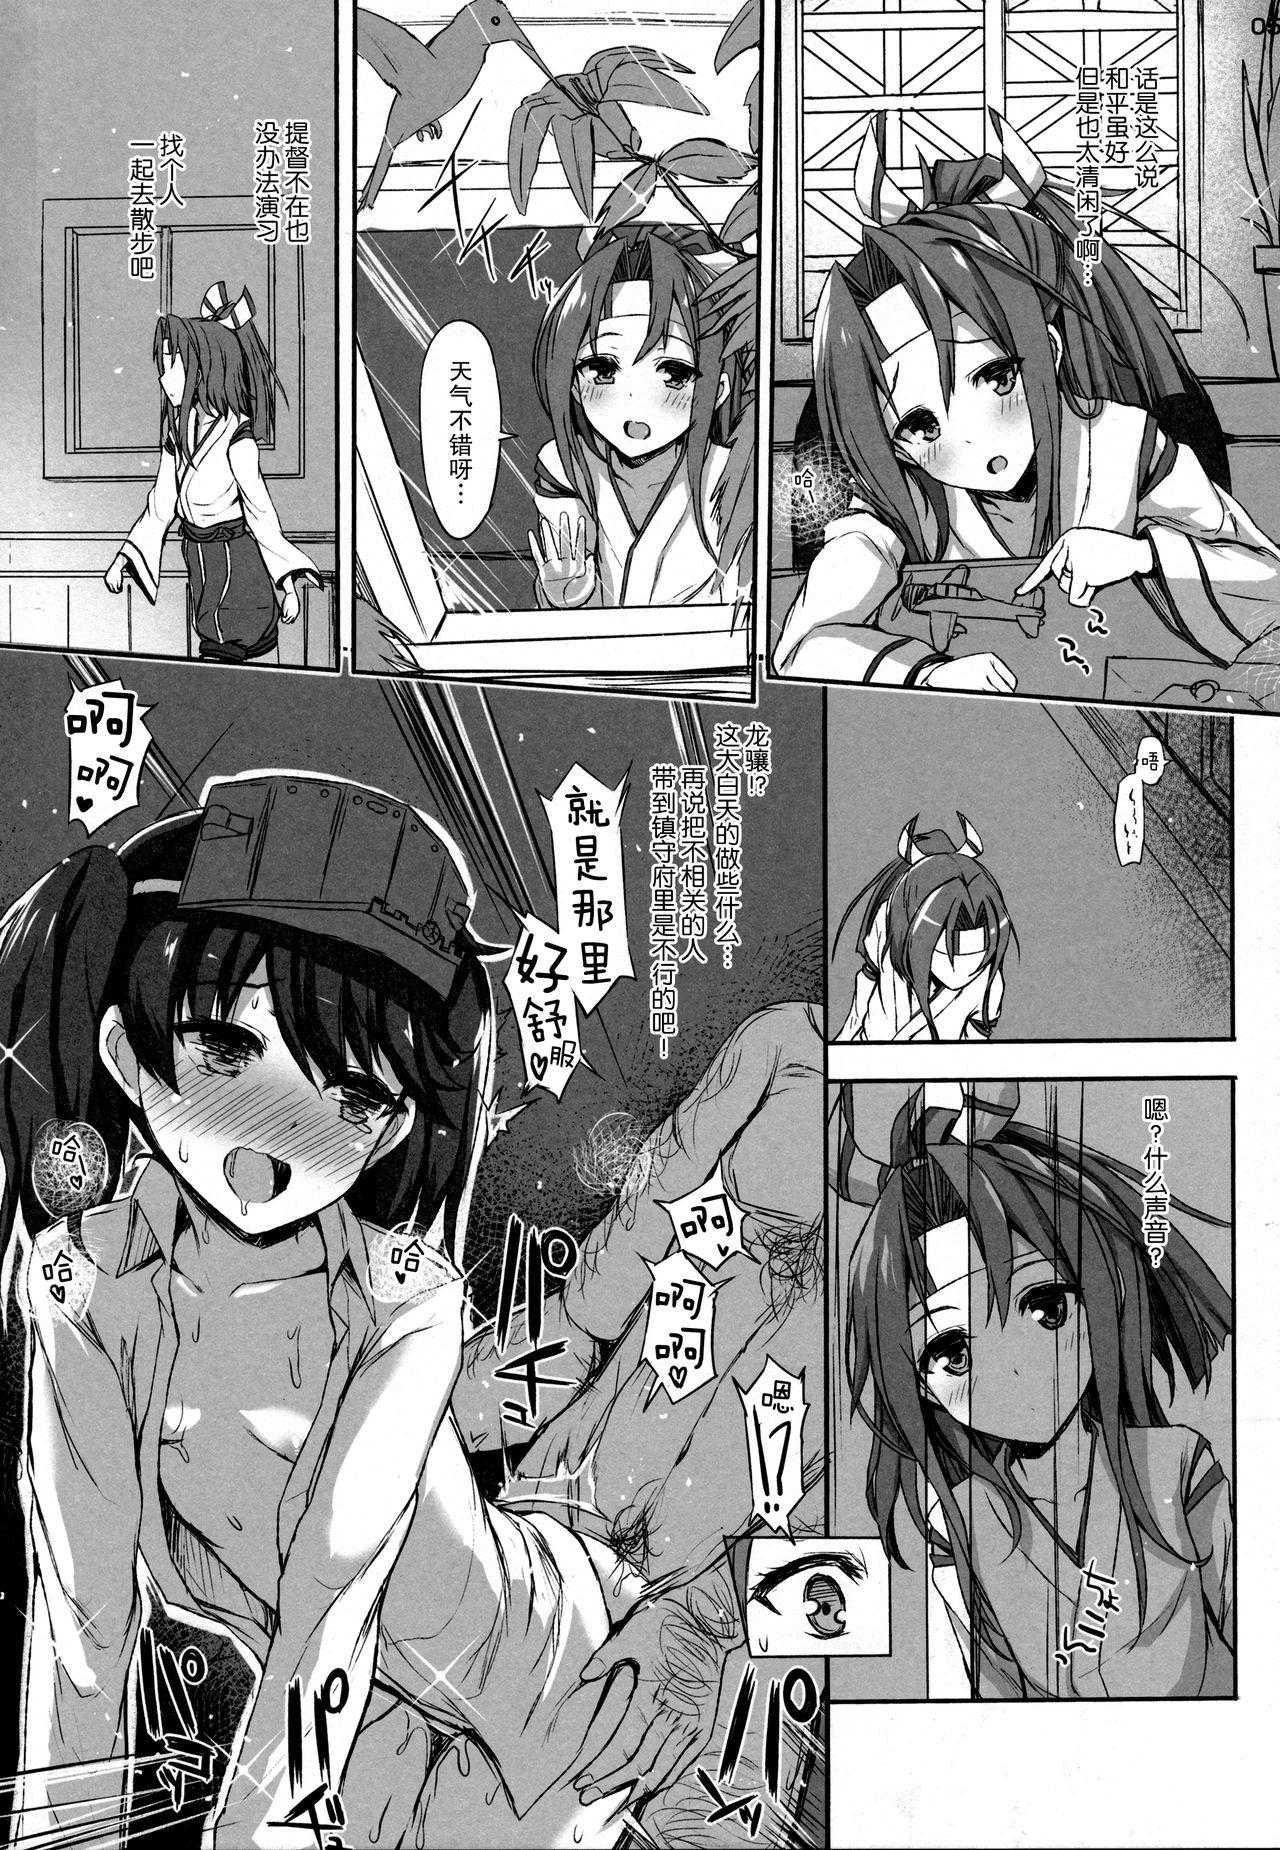  AND THEN NOTHING - Kantai collection Hot Whores - Page 5